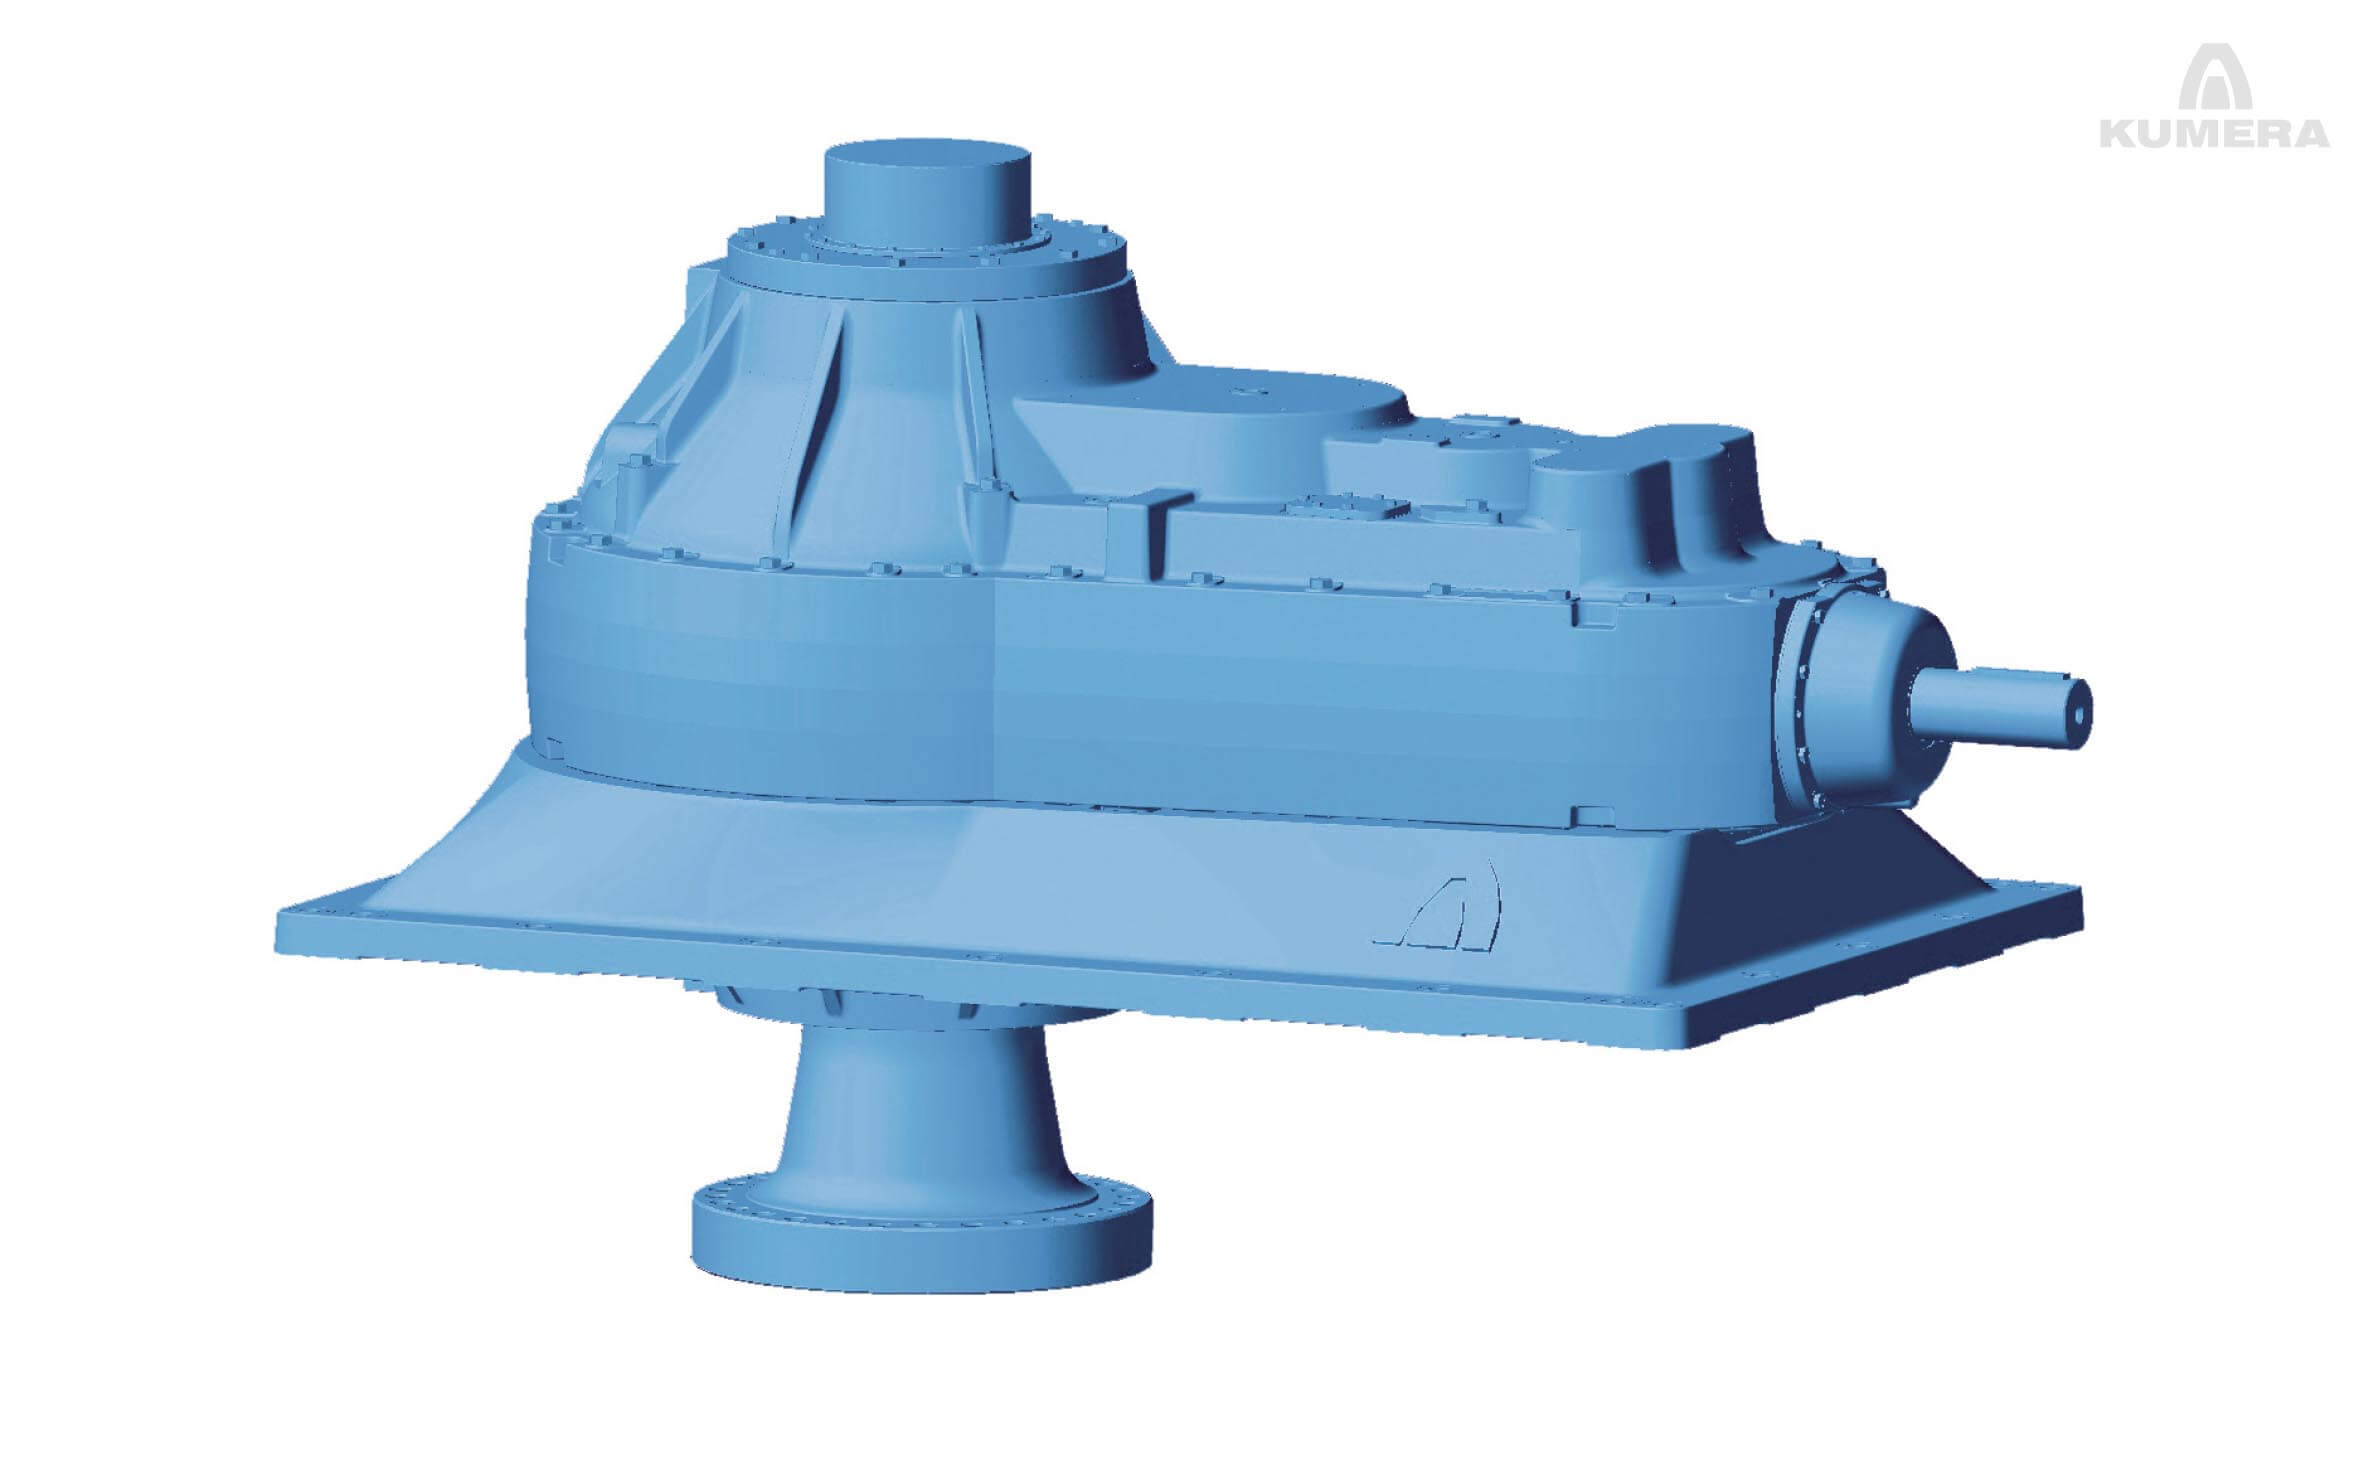 Kumera agitator drives. umera agitator drives are used widely in variable industries globally.